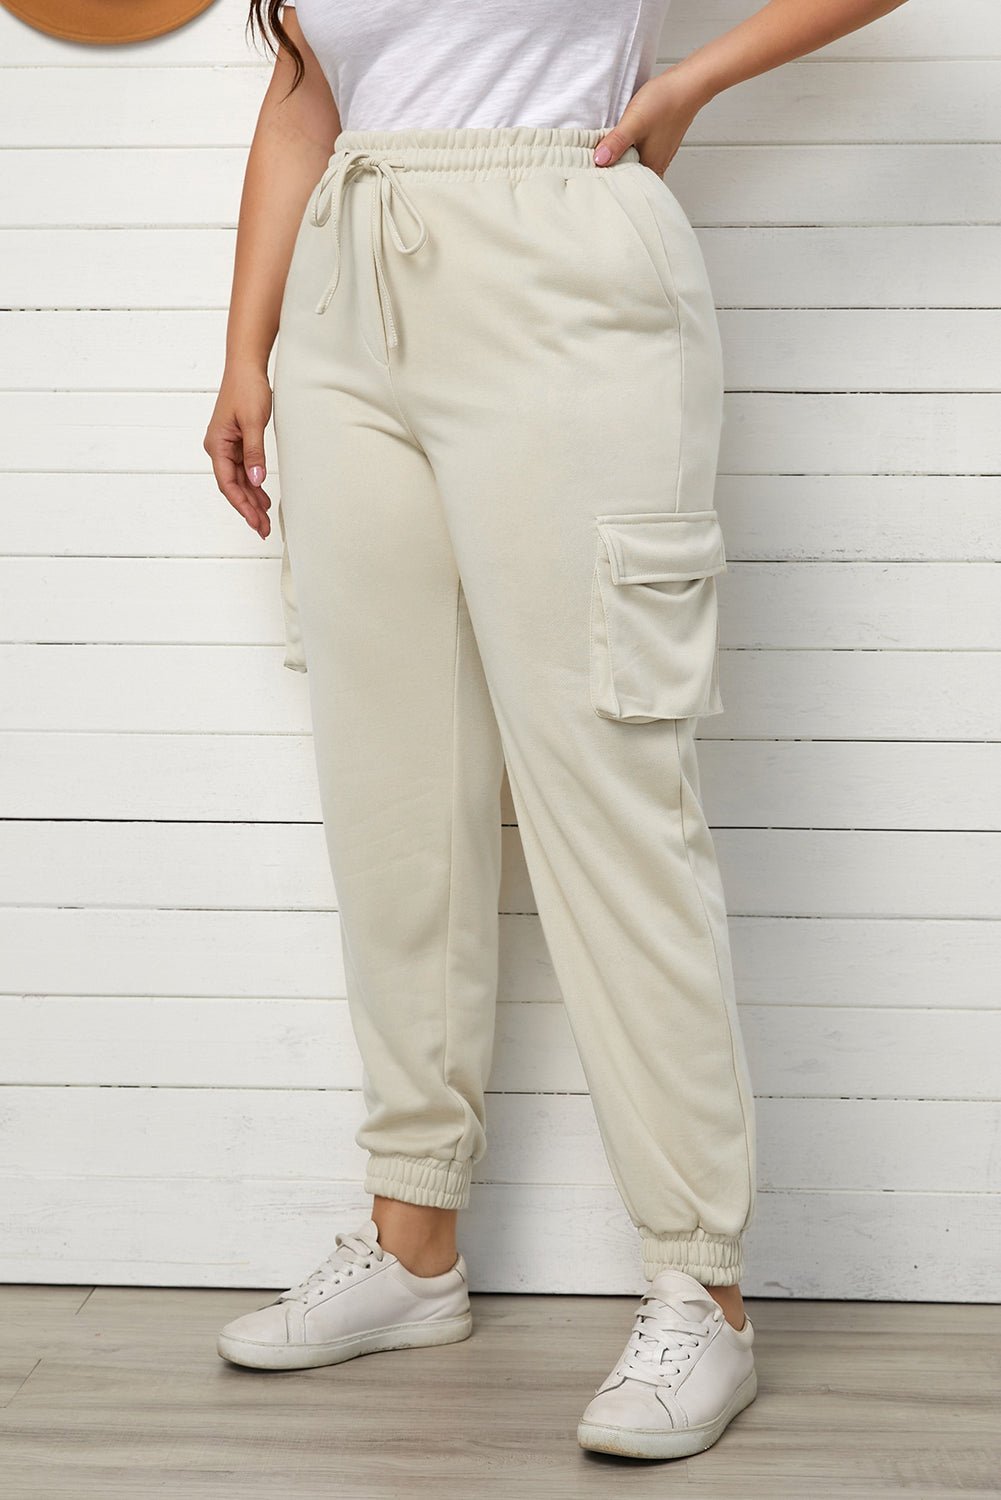 Plus Size Elastic Waist Joggers with Pockets - OMG! Rose